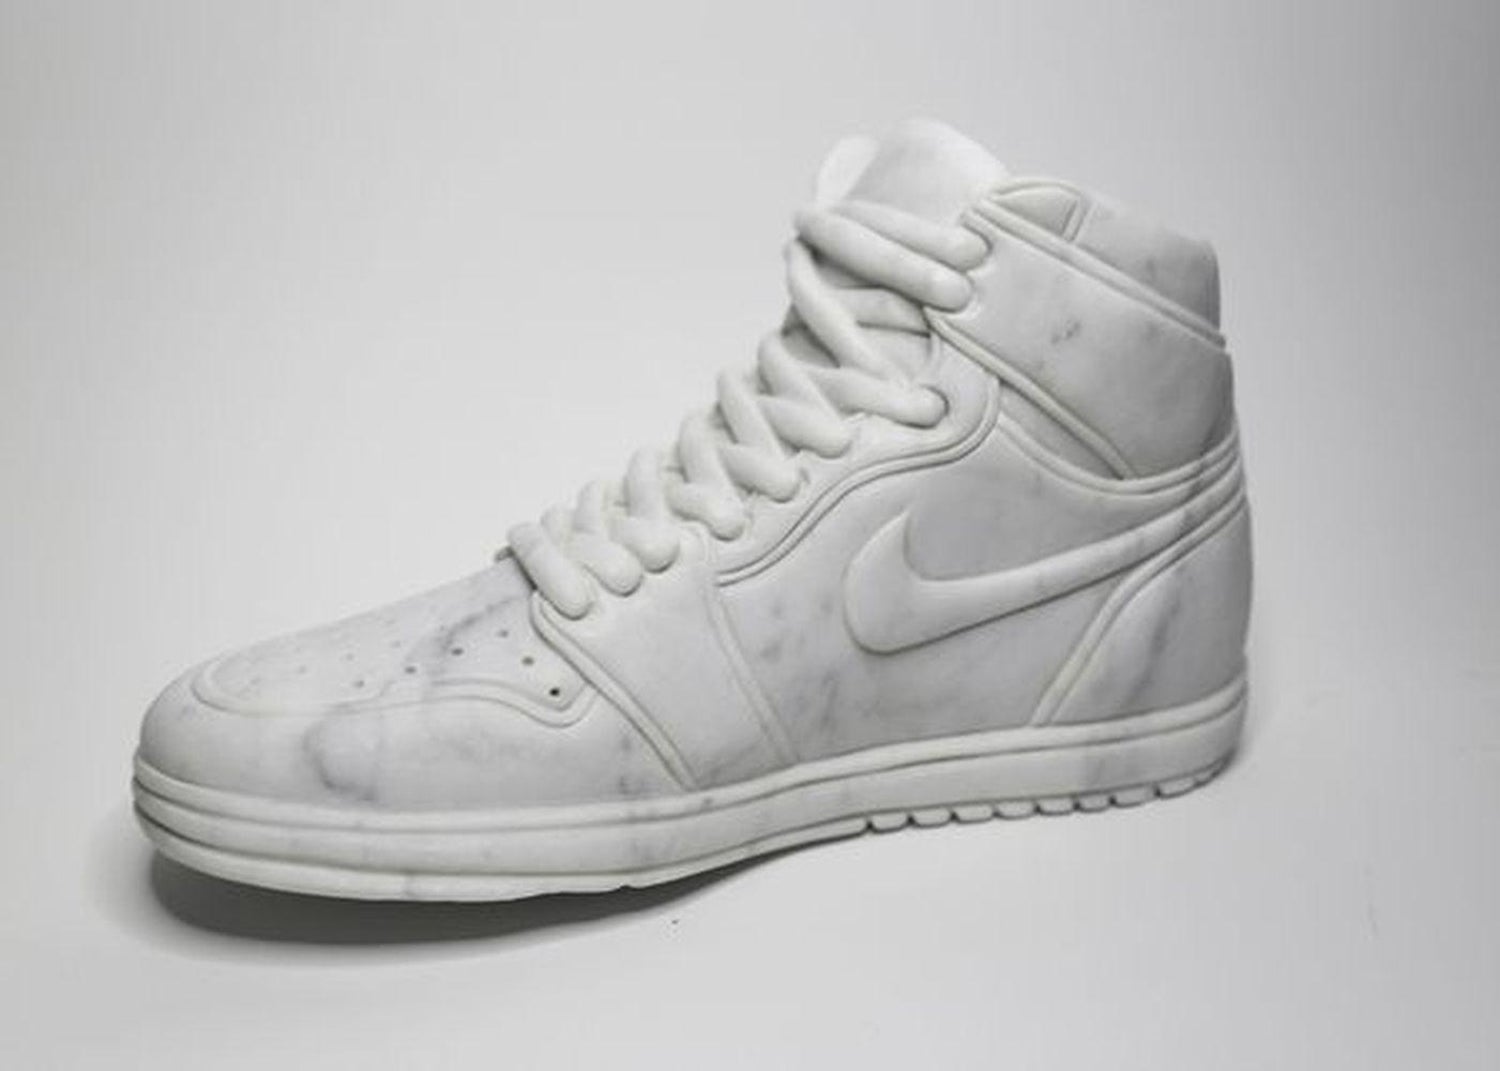 Frank Hollywood - White Marble Nike Shoes /Clothing and Fashion Sculpture /  "His Airness" For Sale at 1stDibs | nike shoe sculpture, airness clothing,  nike hollywood